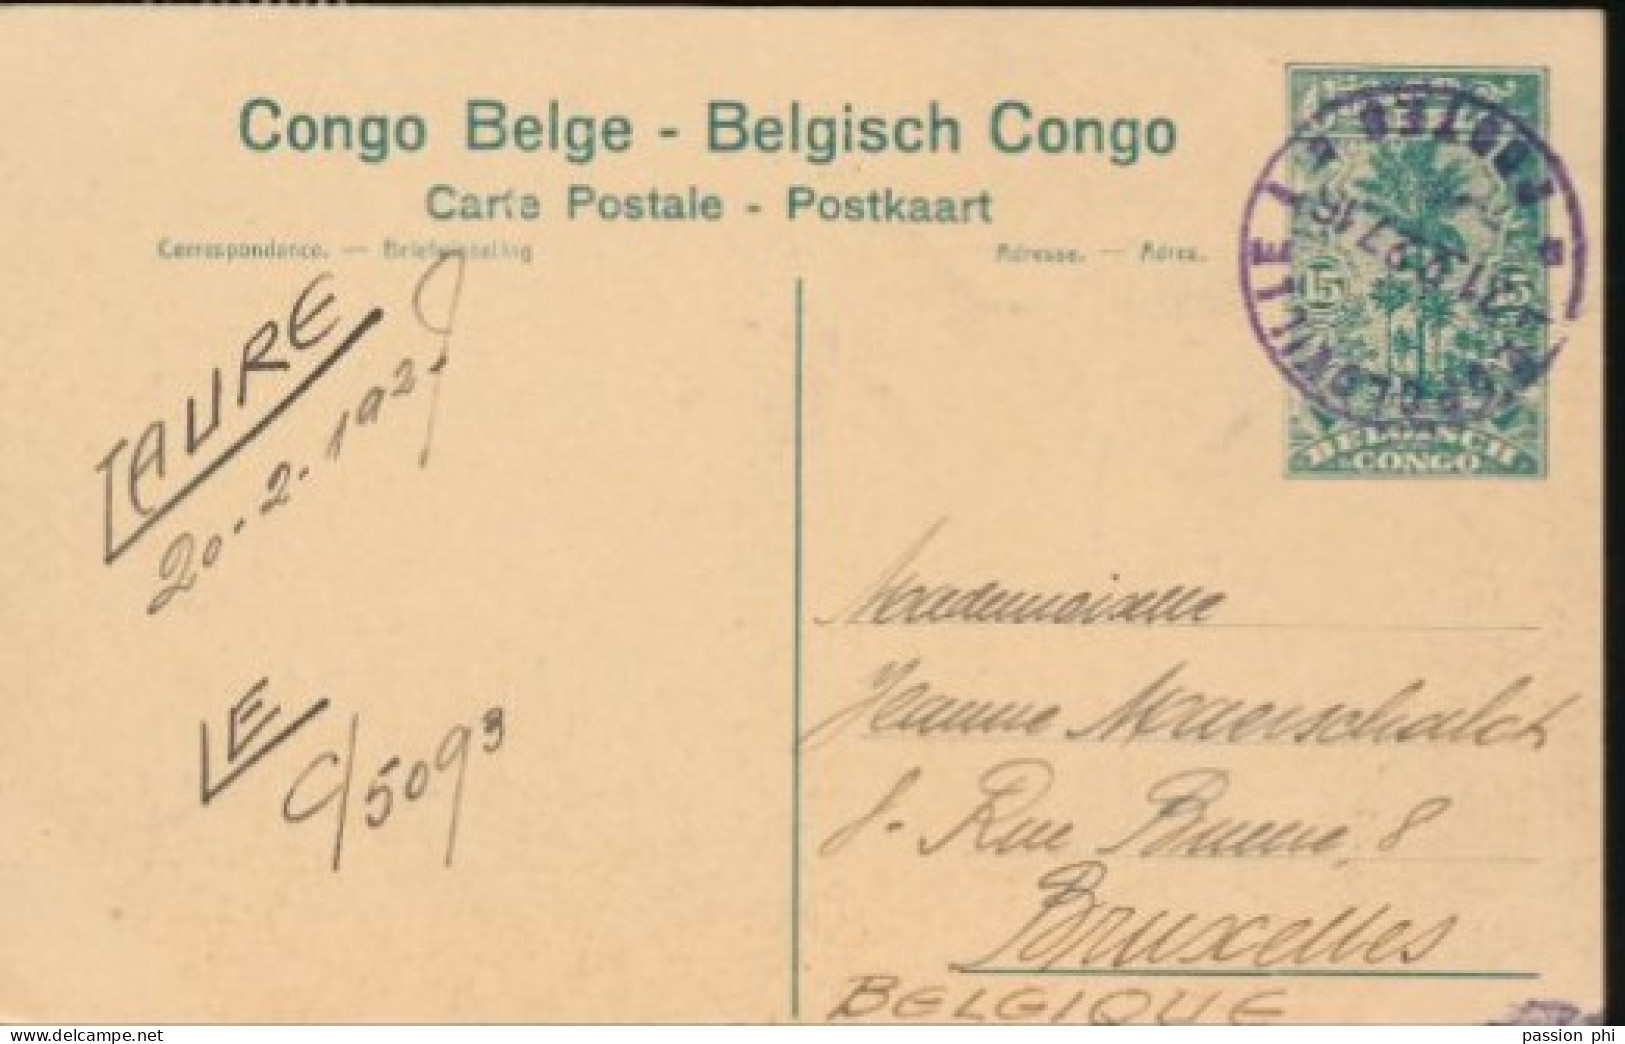 BELGIAN CONGO PPS SBEP 61 VIEW 101 USED - Stamped Stationery